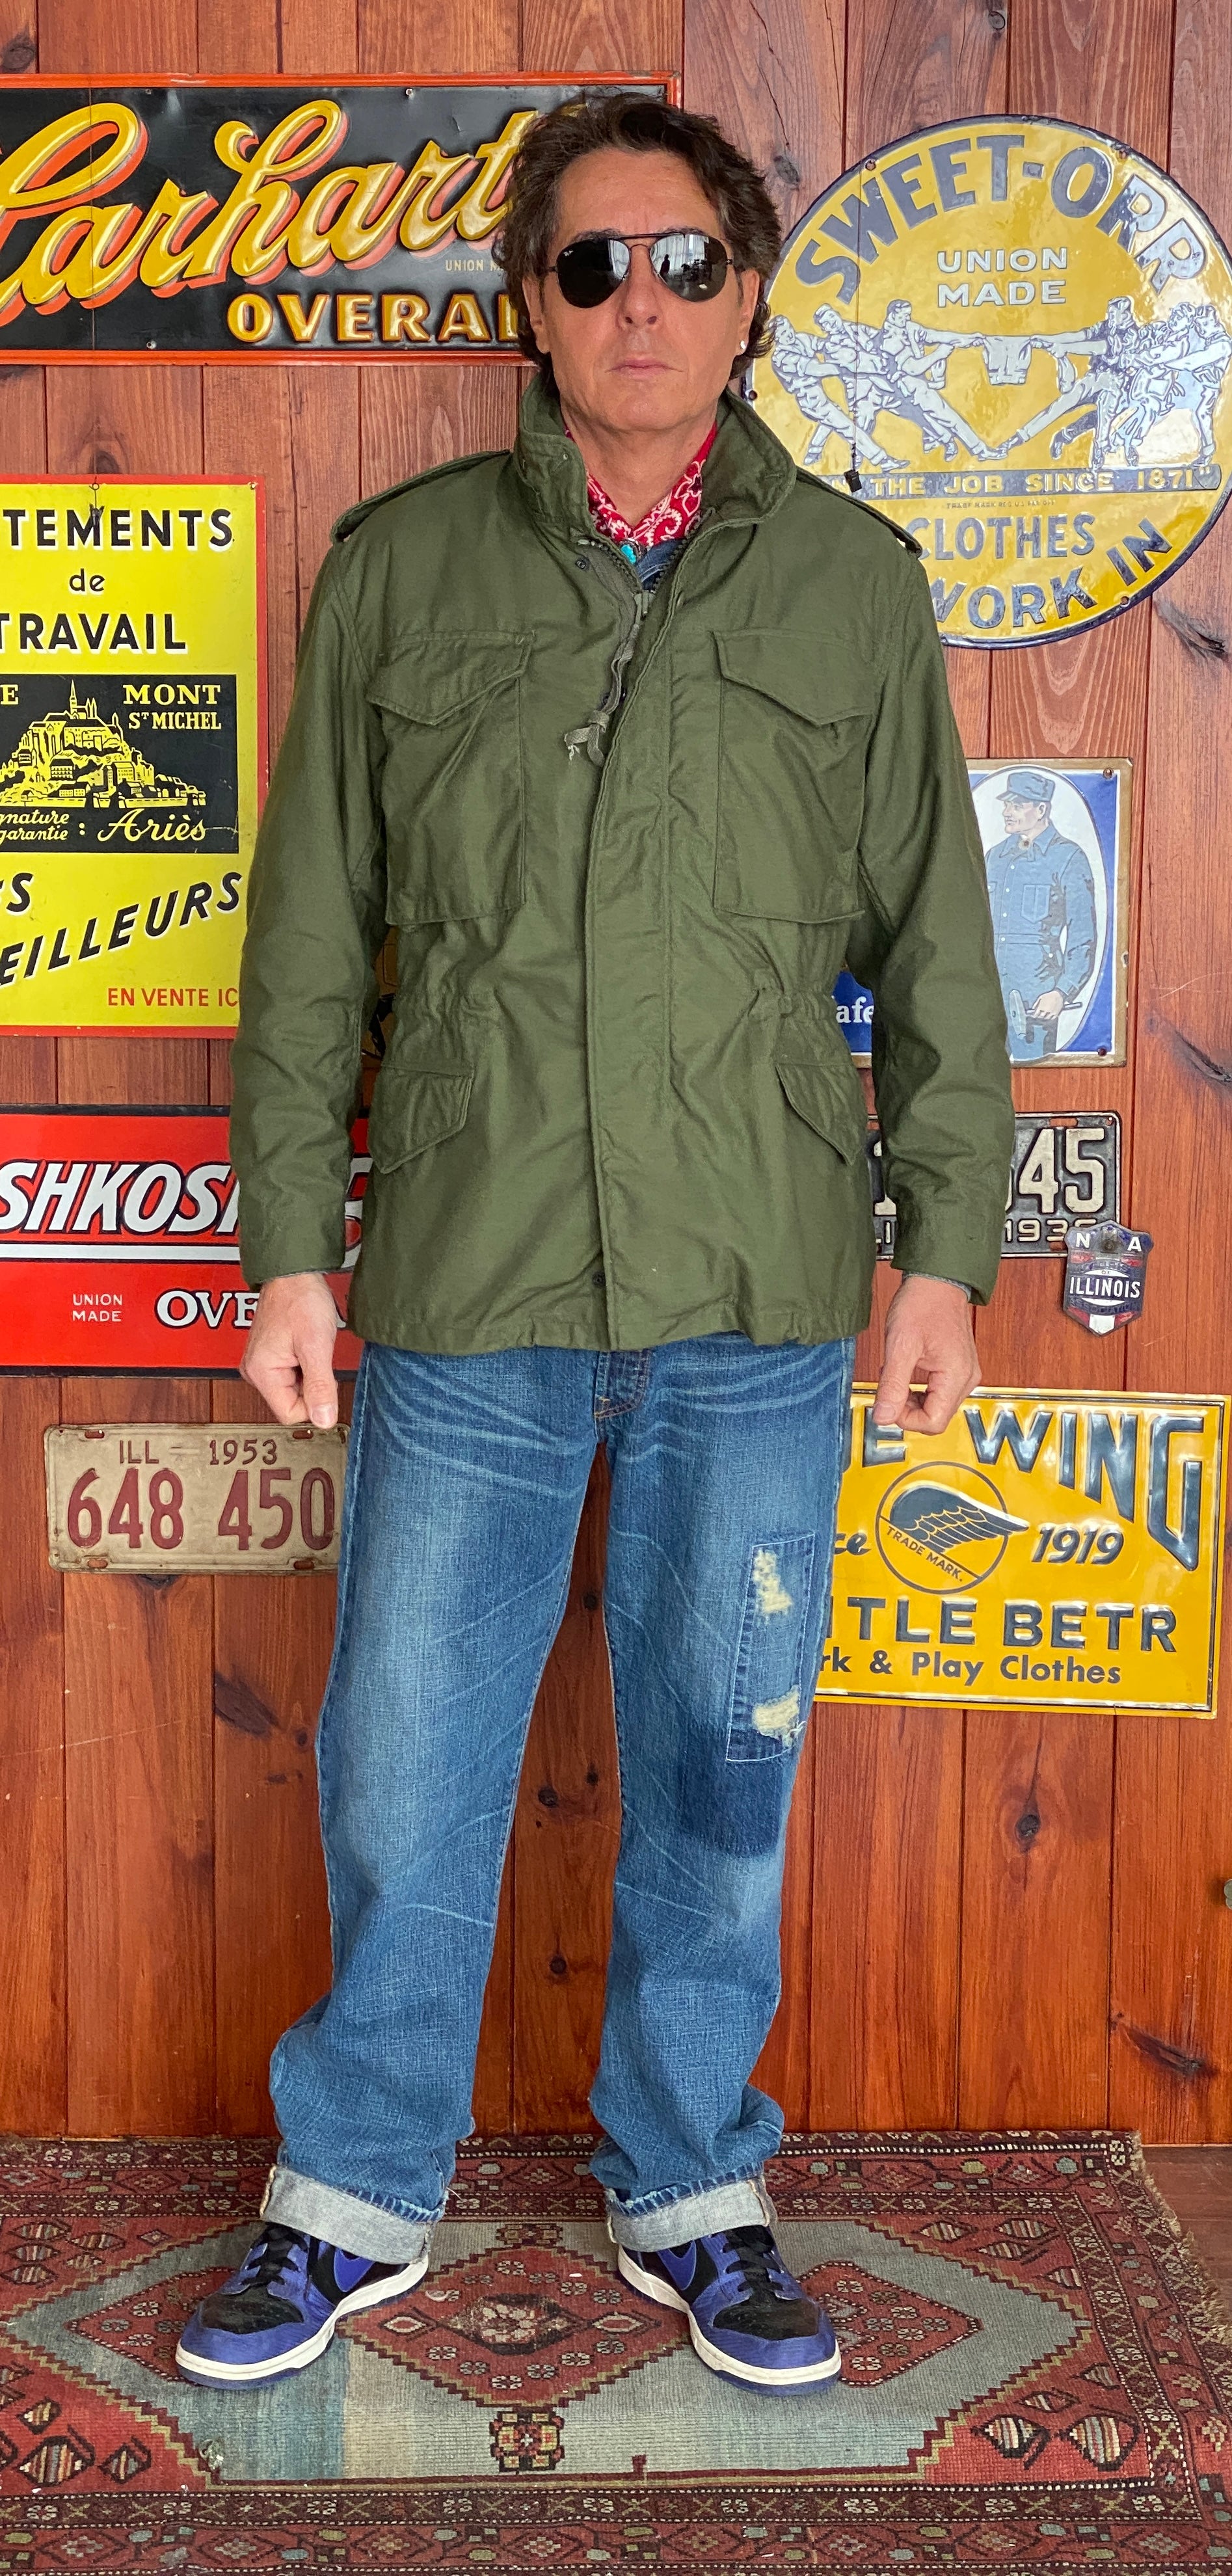 Authentic 1987 US Army Vintage M-65 Field Jacket in Olive Green | Classic Military Apparel with Timeless Style and Durability